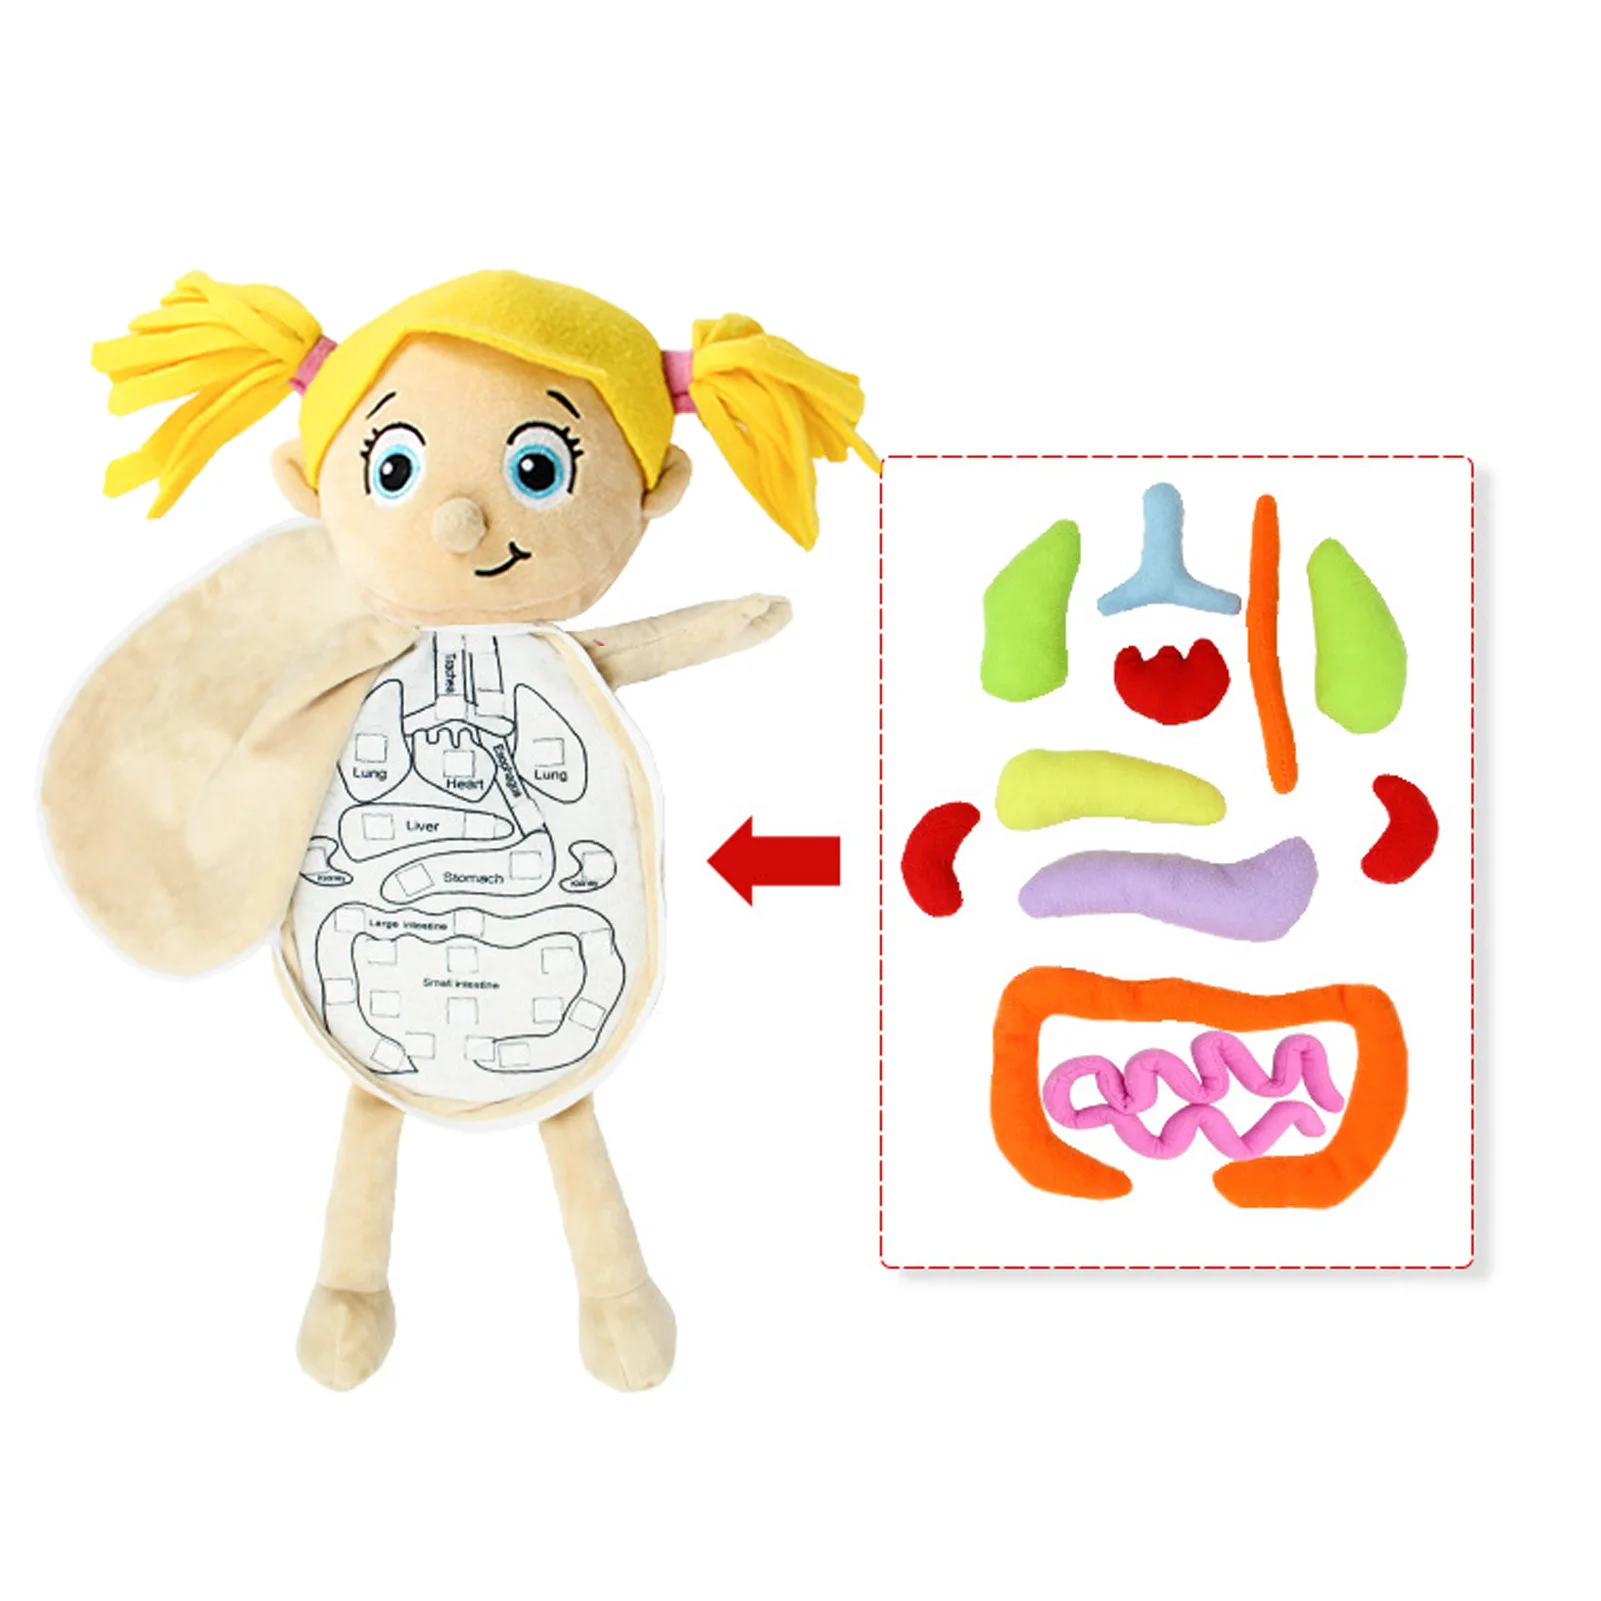 

Kids Assembled Plush Body Organs Toy Human Body Anatomy Plush Doll Science Teaching Aids Tool Educational Toys For Children